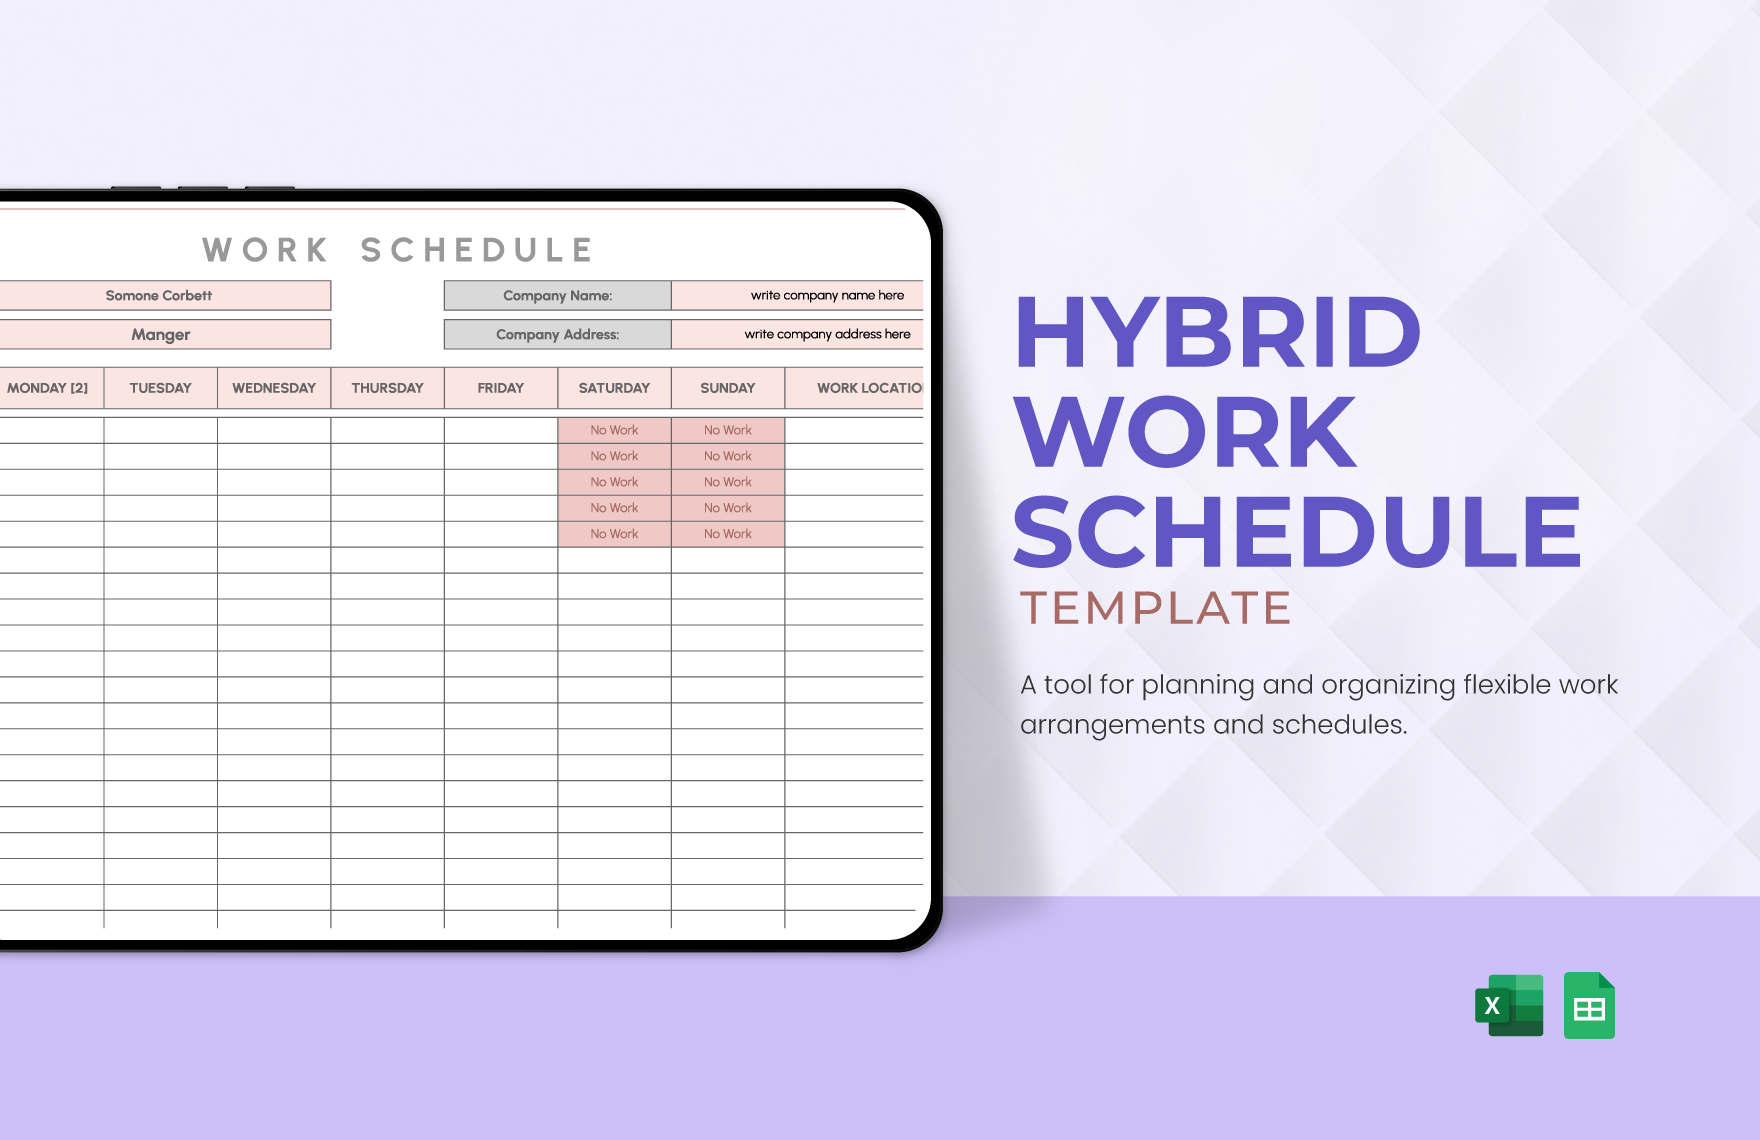 Free Hybrid Work Schedule Template in Excel, Google Sheets